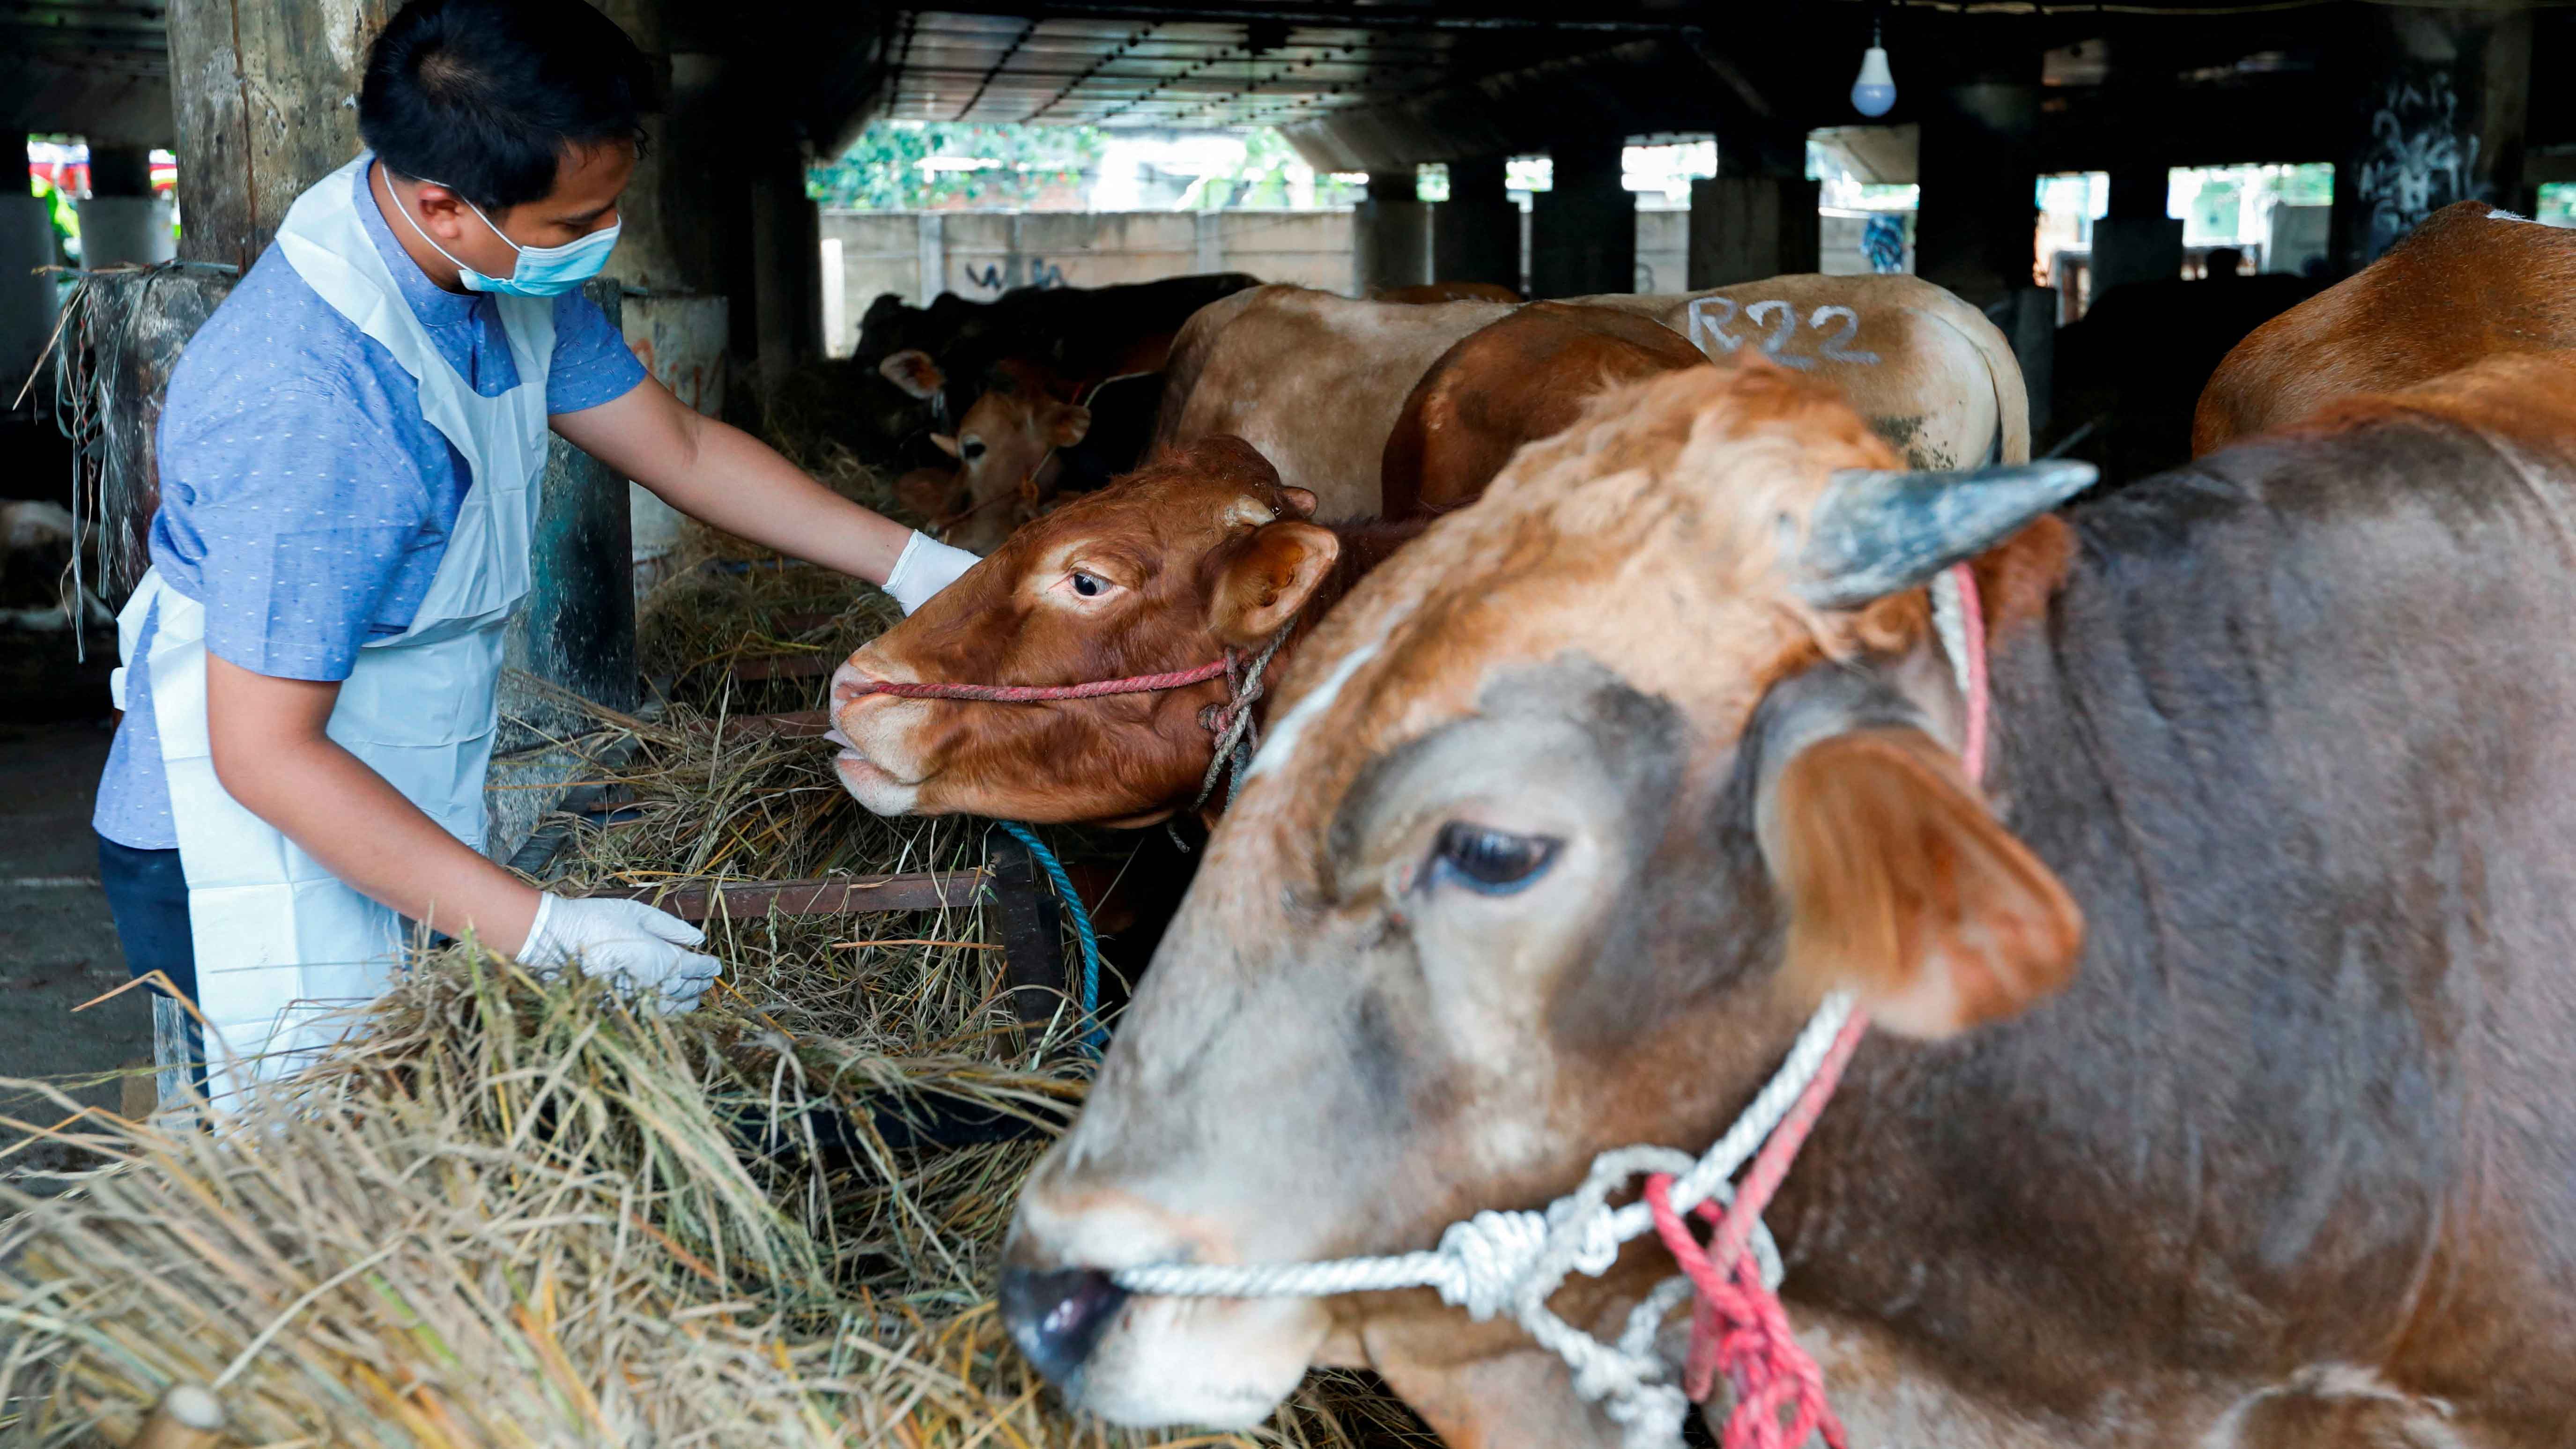 Indonesia focuses on getting their foot and mouth disease outbreak under control by year-end